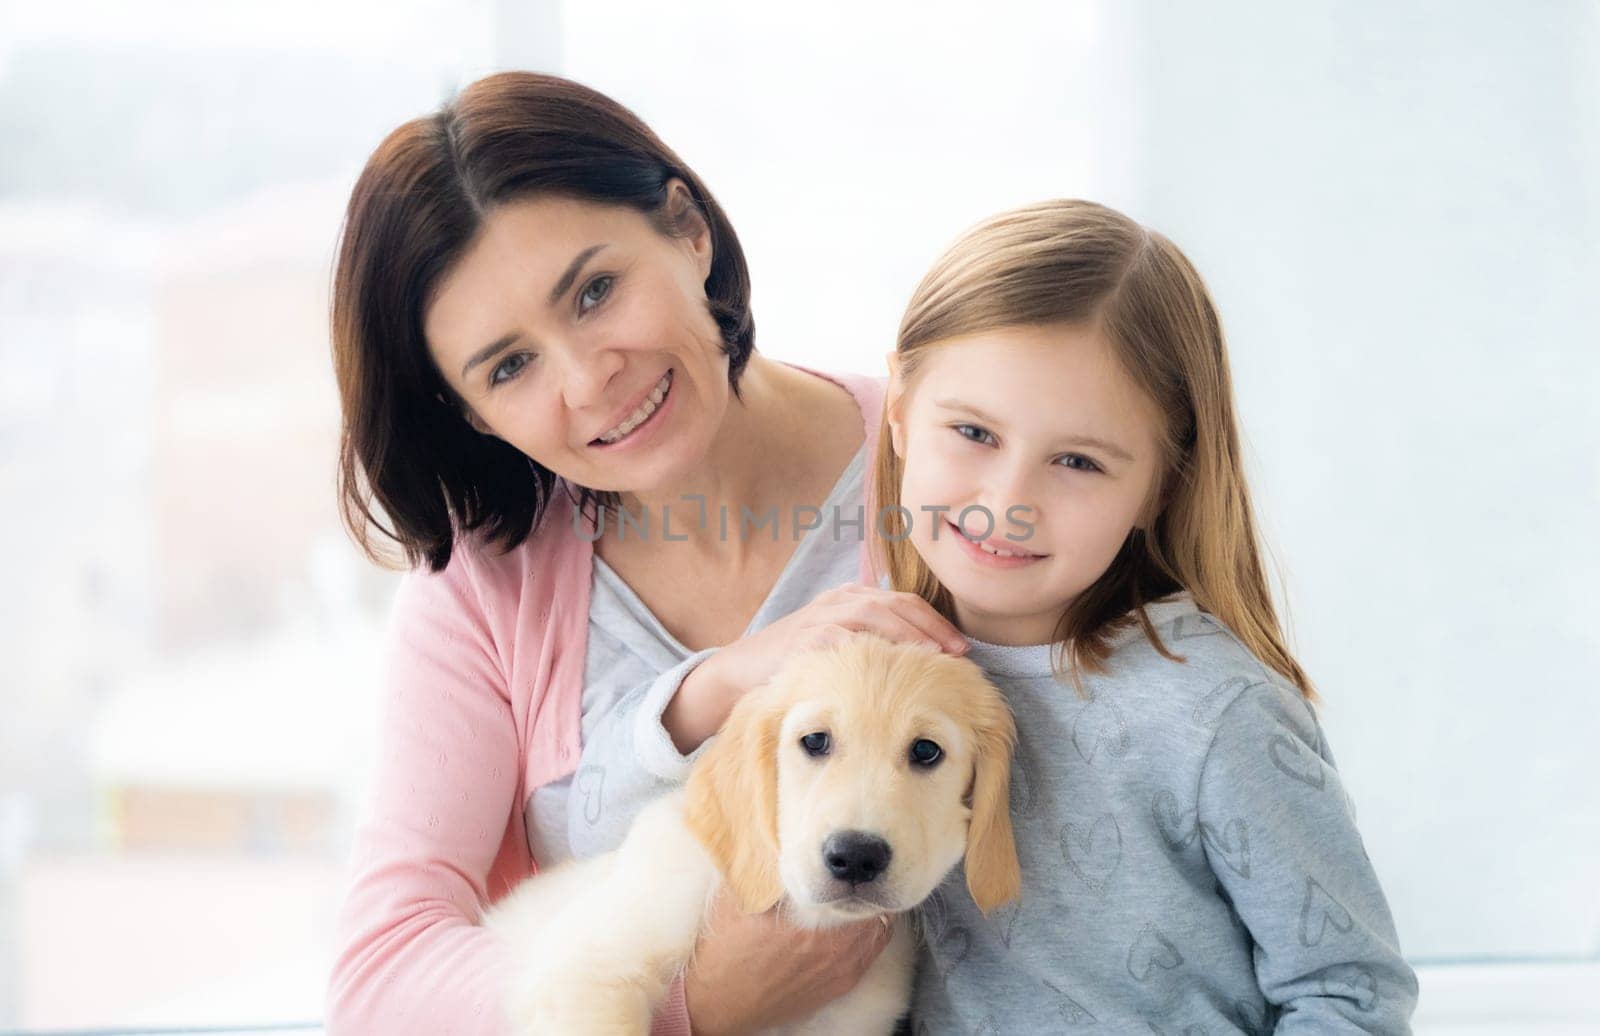 Daughter and mother with dog by GekaSkr